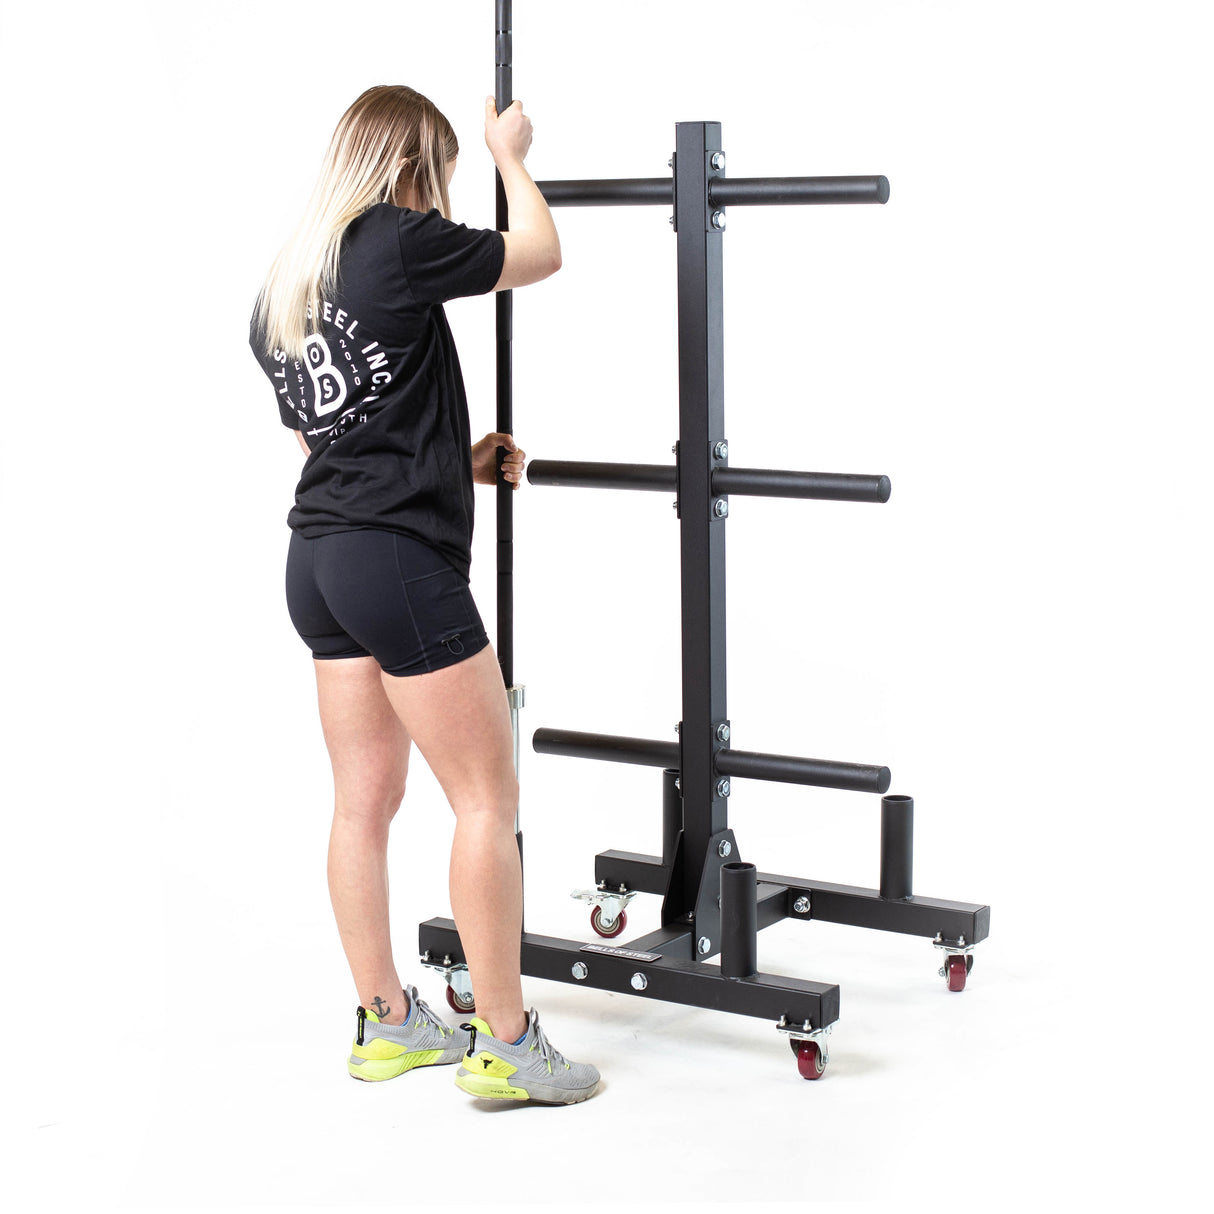 Bumper Plate Weight Tree And Bar Holder